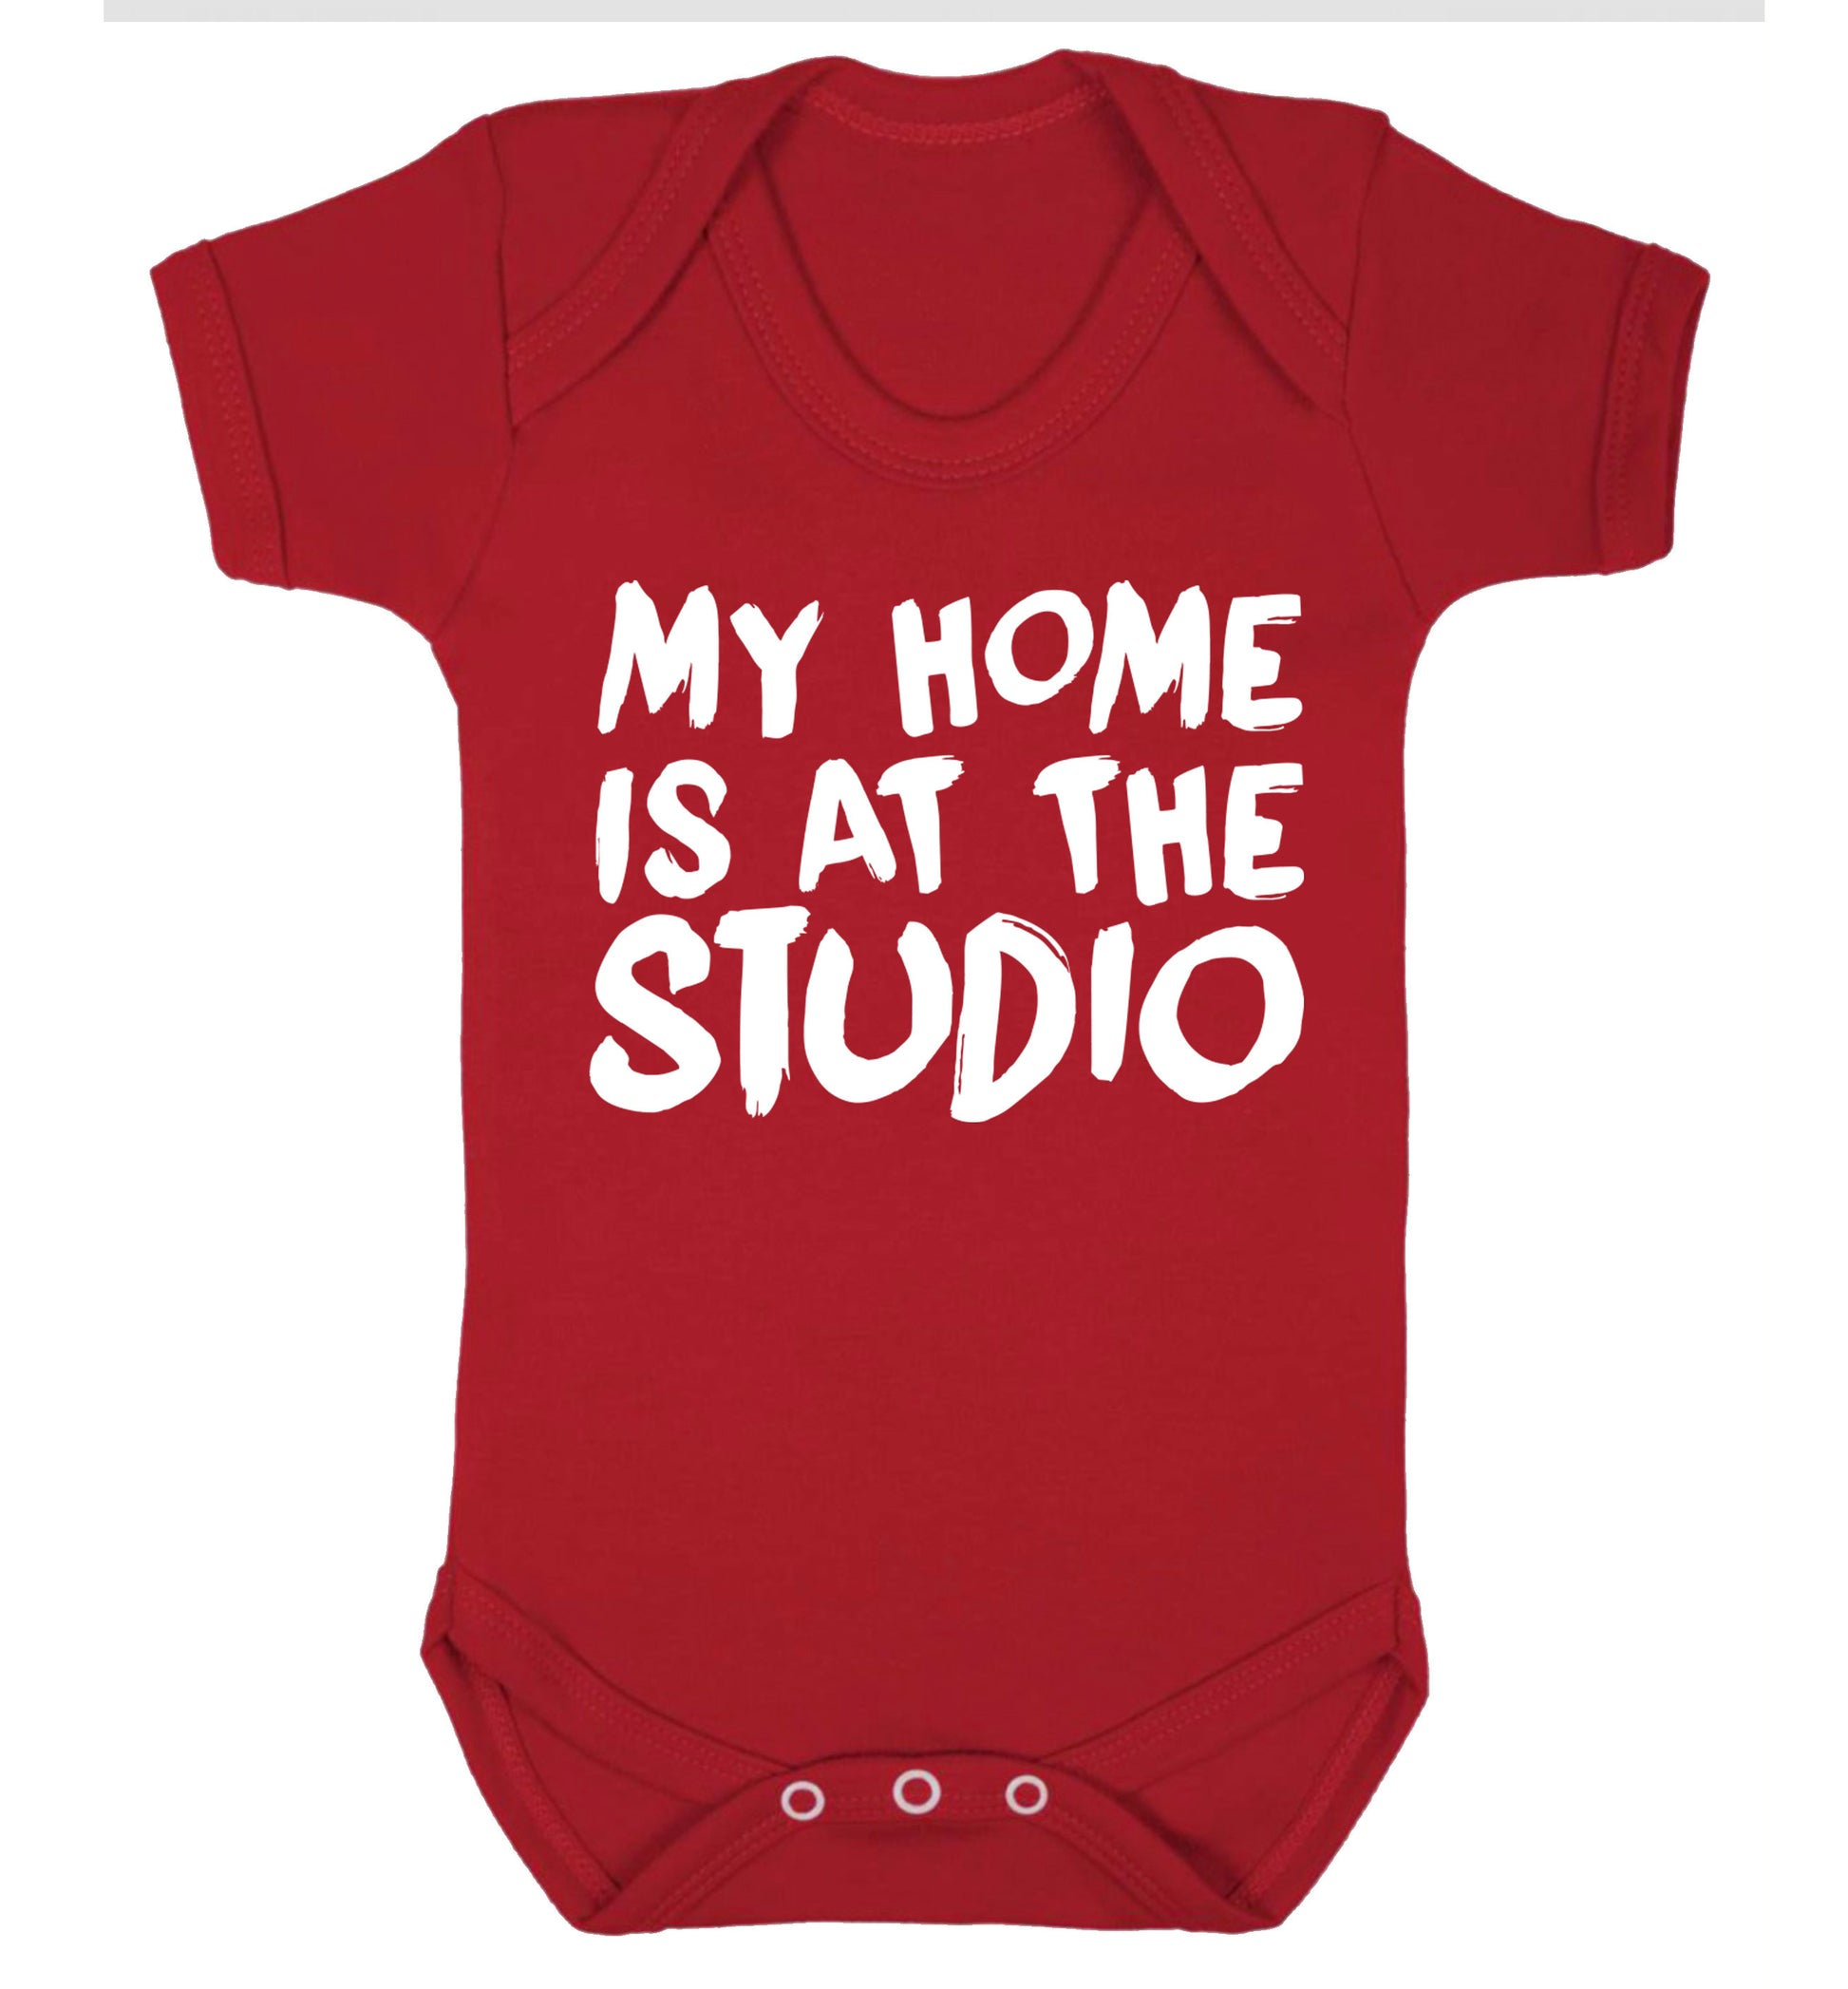 My home is at the studio Baby Vest red 18-24 months